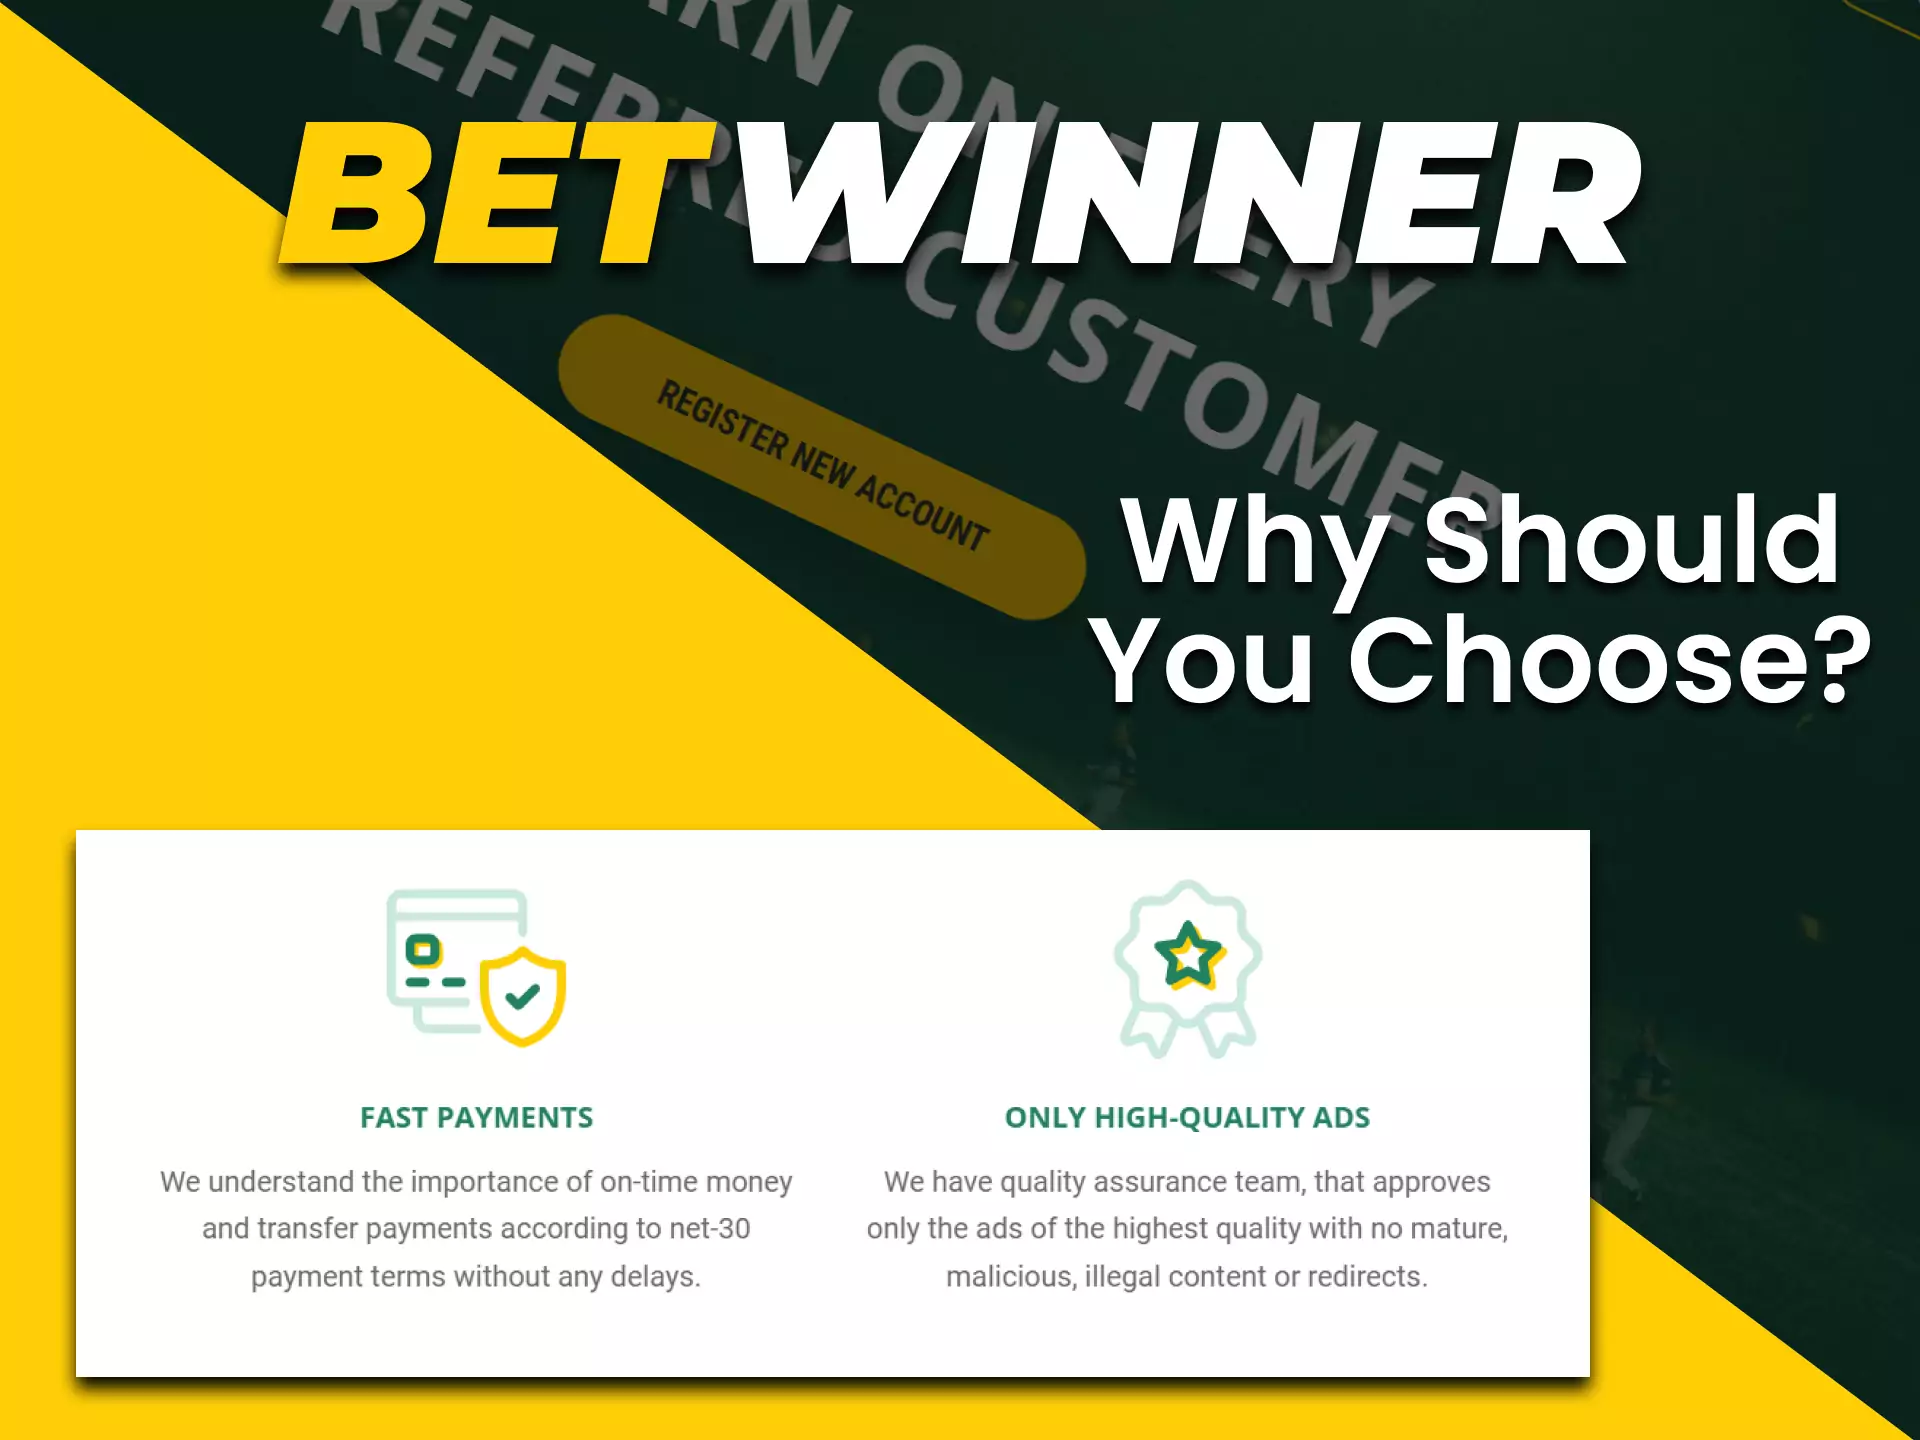 3 Things Everyone Knows About Betwinner Affiliation That You Don't